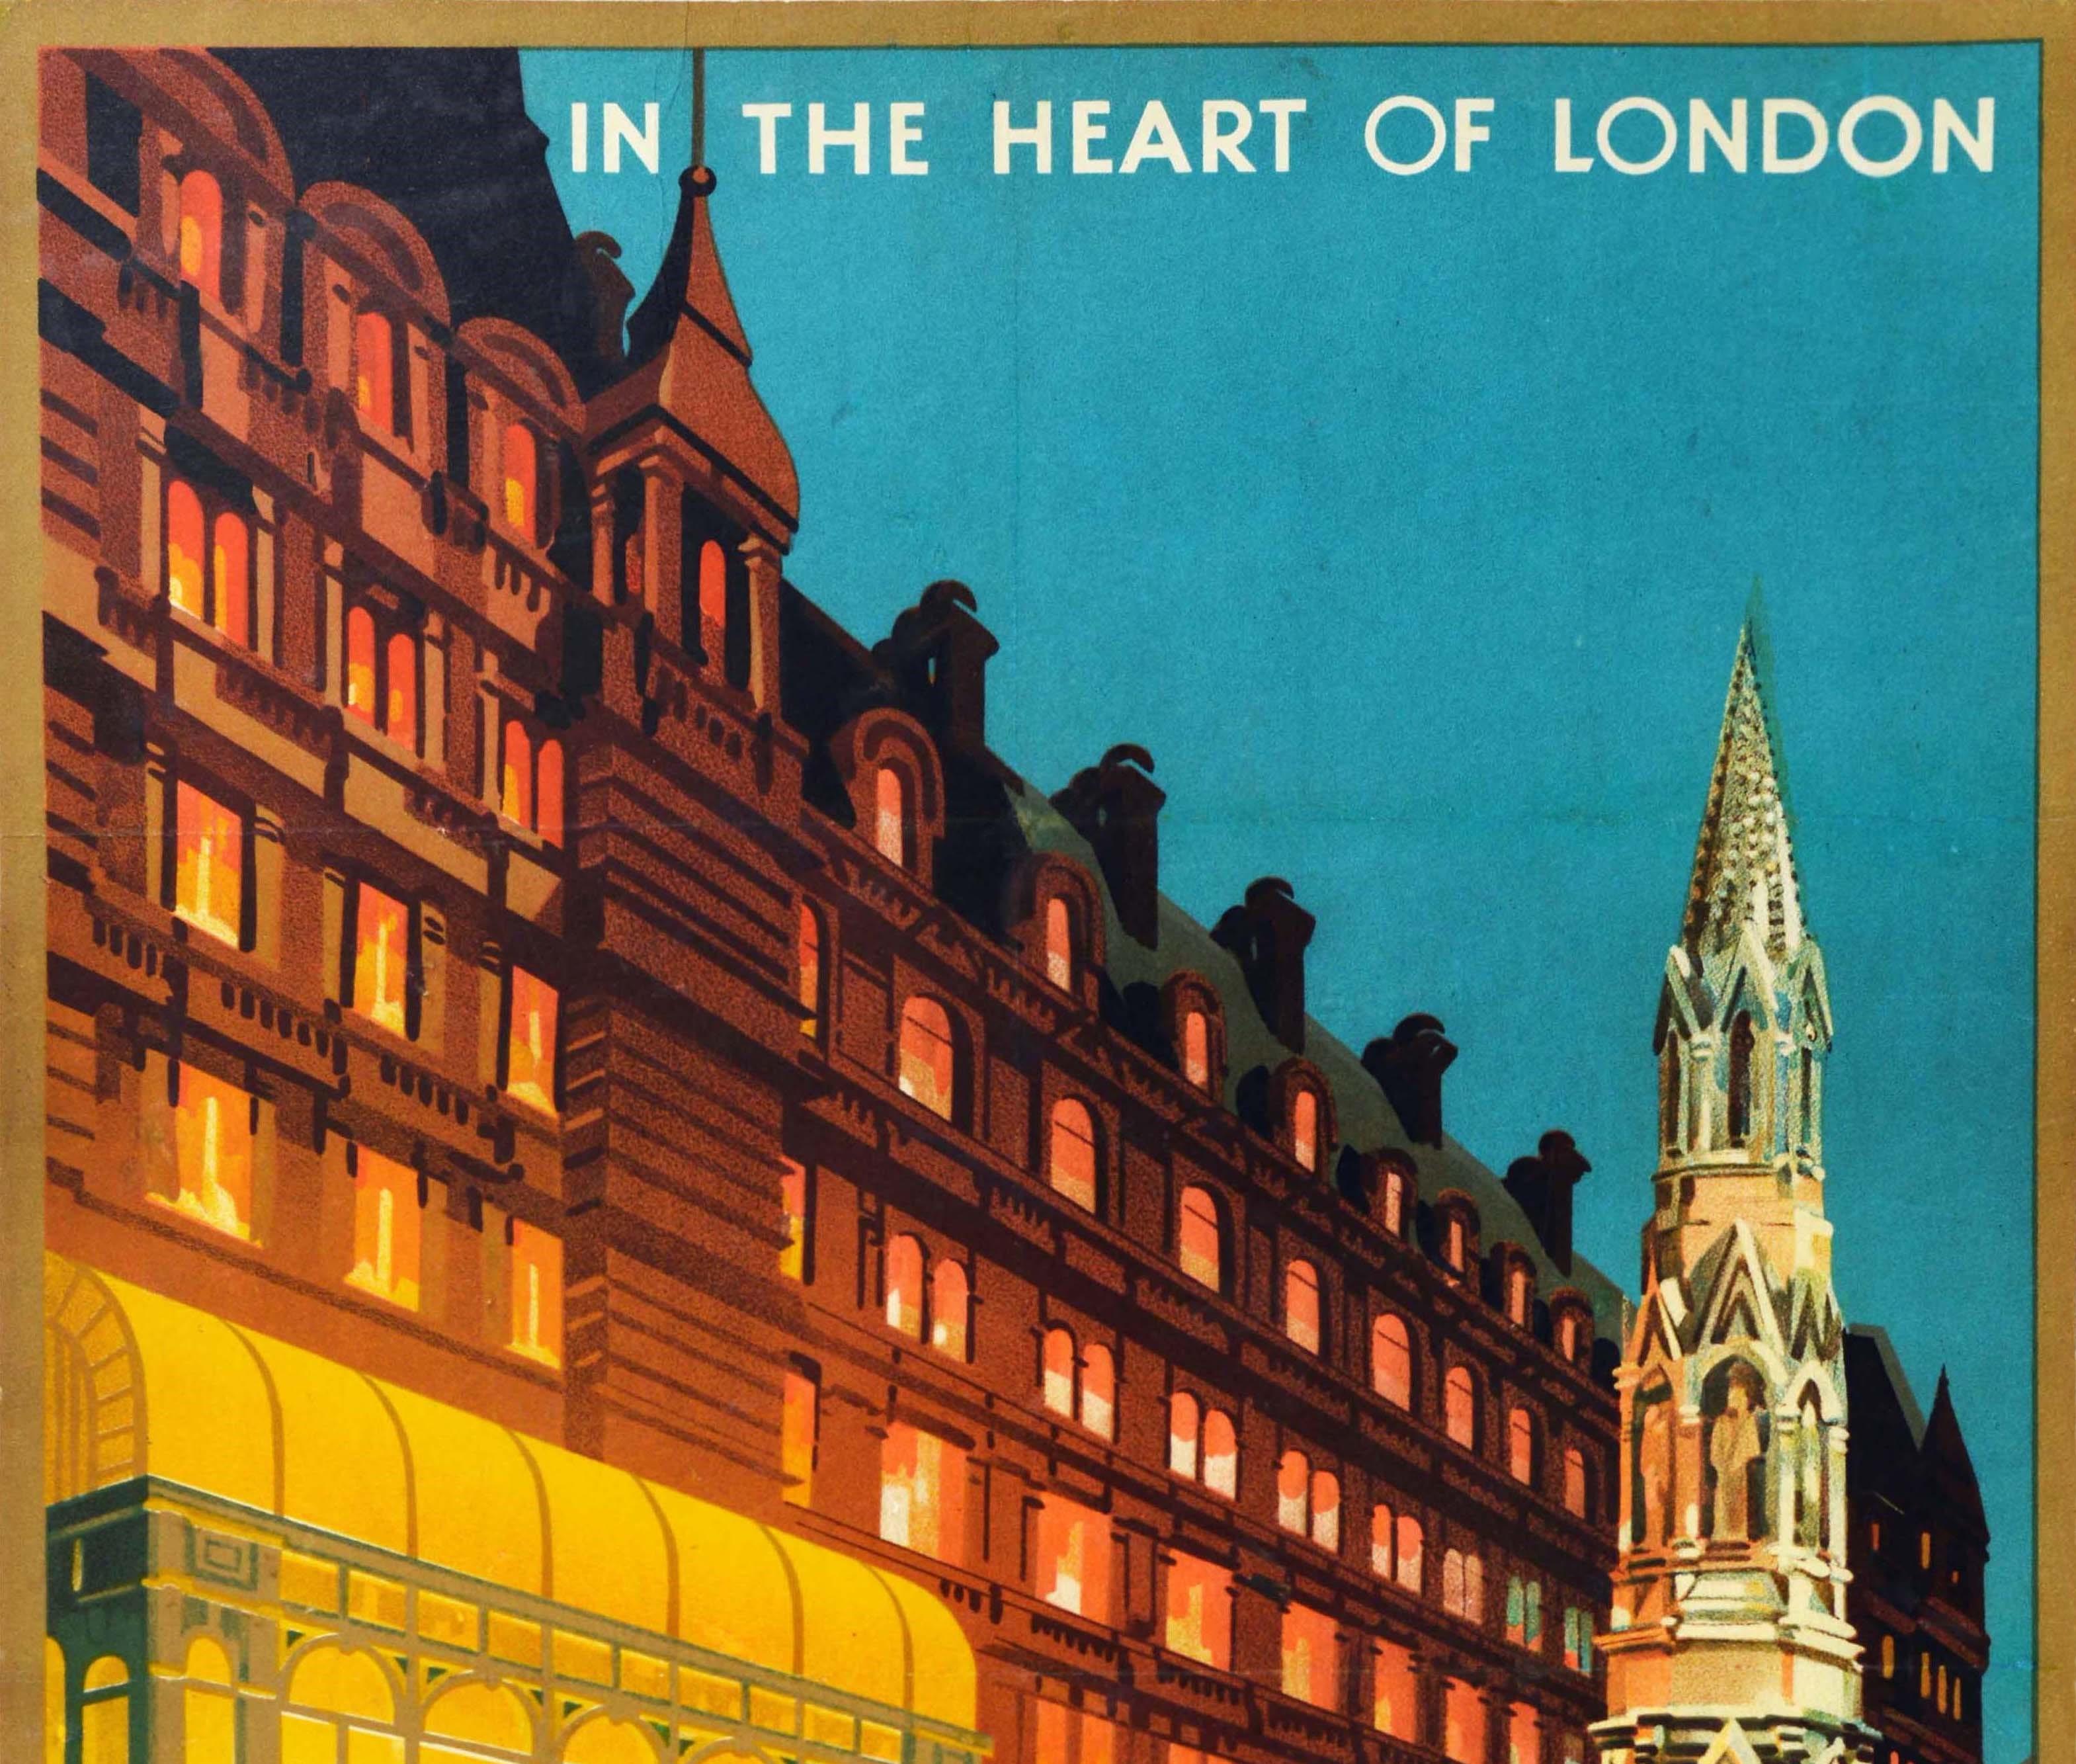 Original vintage travel poster for the Charing Cross Hotel and Restaurant in the Heart of London Redecorated and Refurnished featuring a stunning Art Deco design of the hotel brightly lit in the evening with smartly dressed people in coats walking